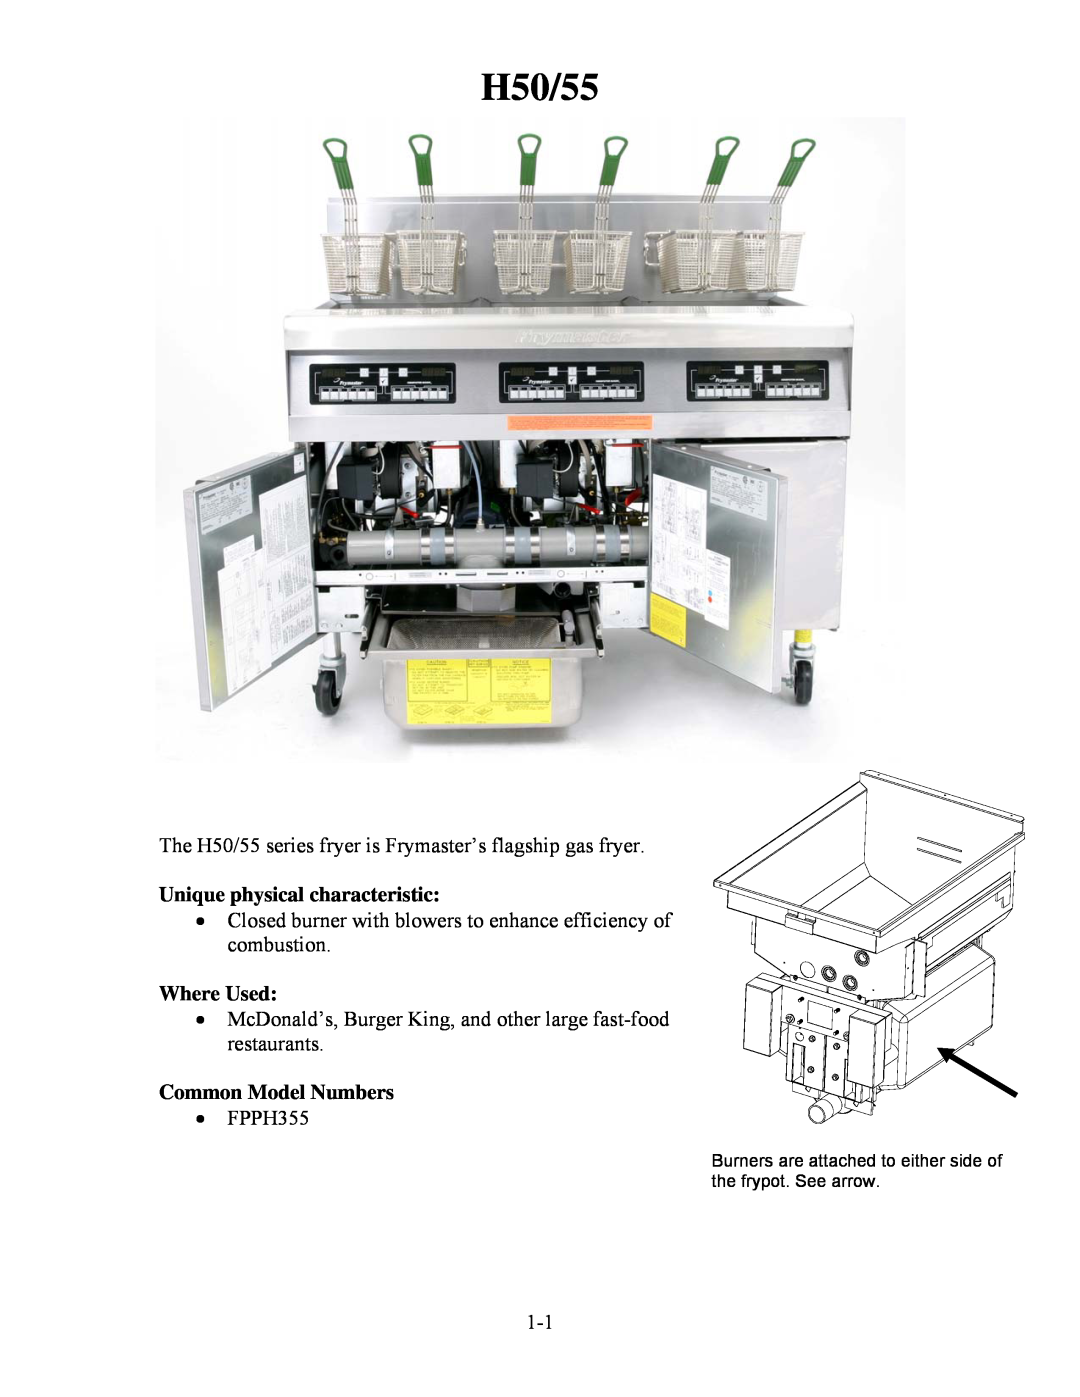 Frymaster The H50/55 series fryer is Frymaster’s flagship gas fryer, Unique physical characteristic, Where Used 